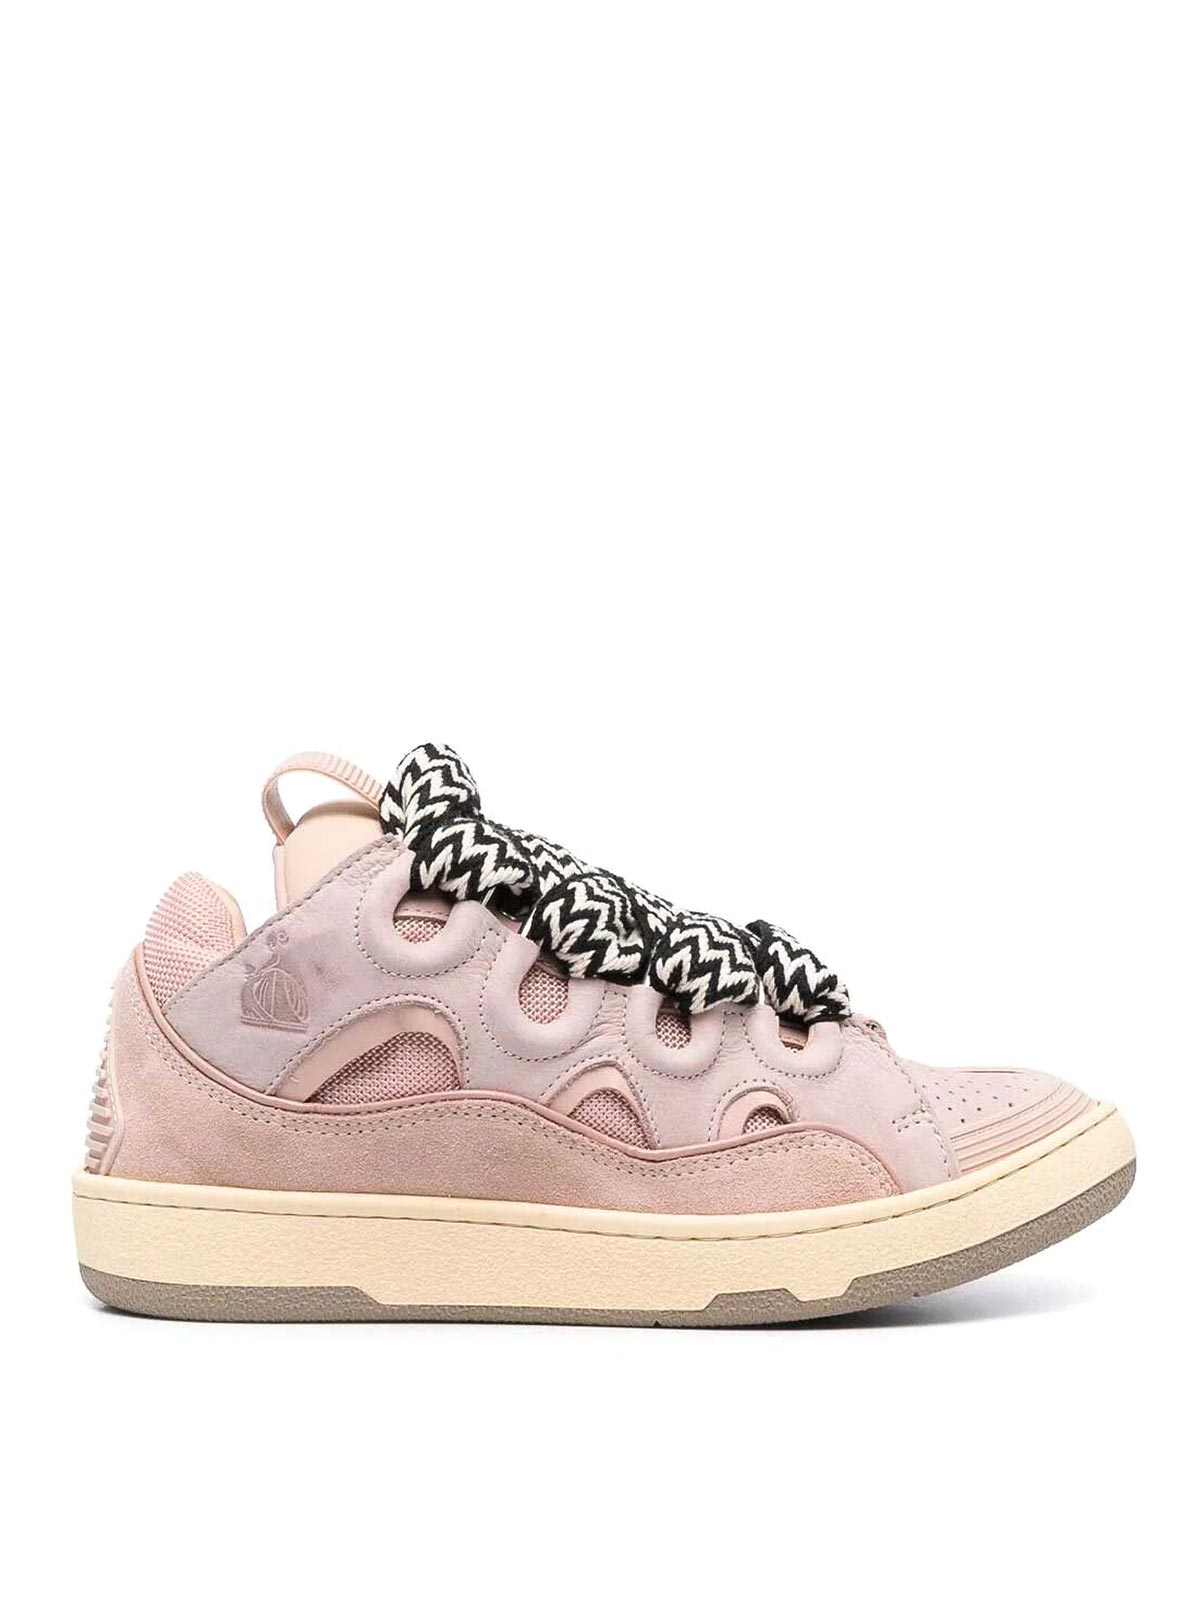 Lanvin Curb Light Trainers In Nude & Neutrals